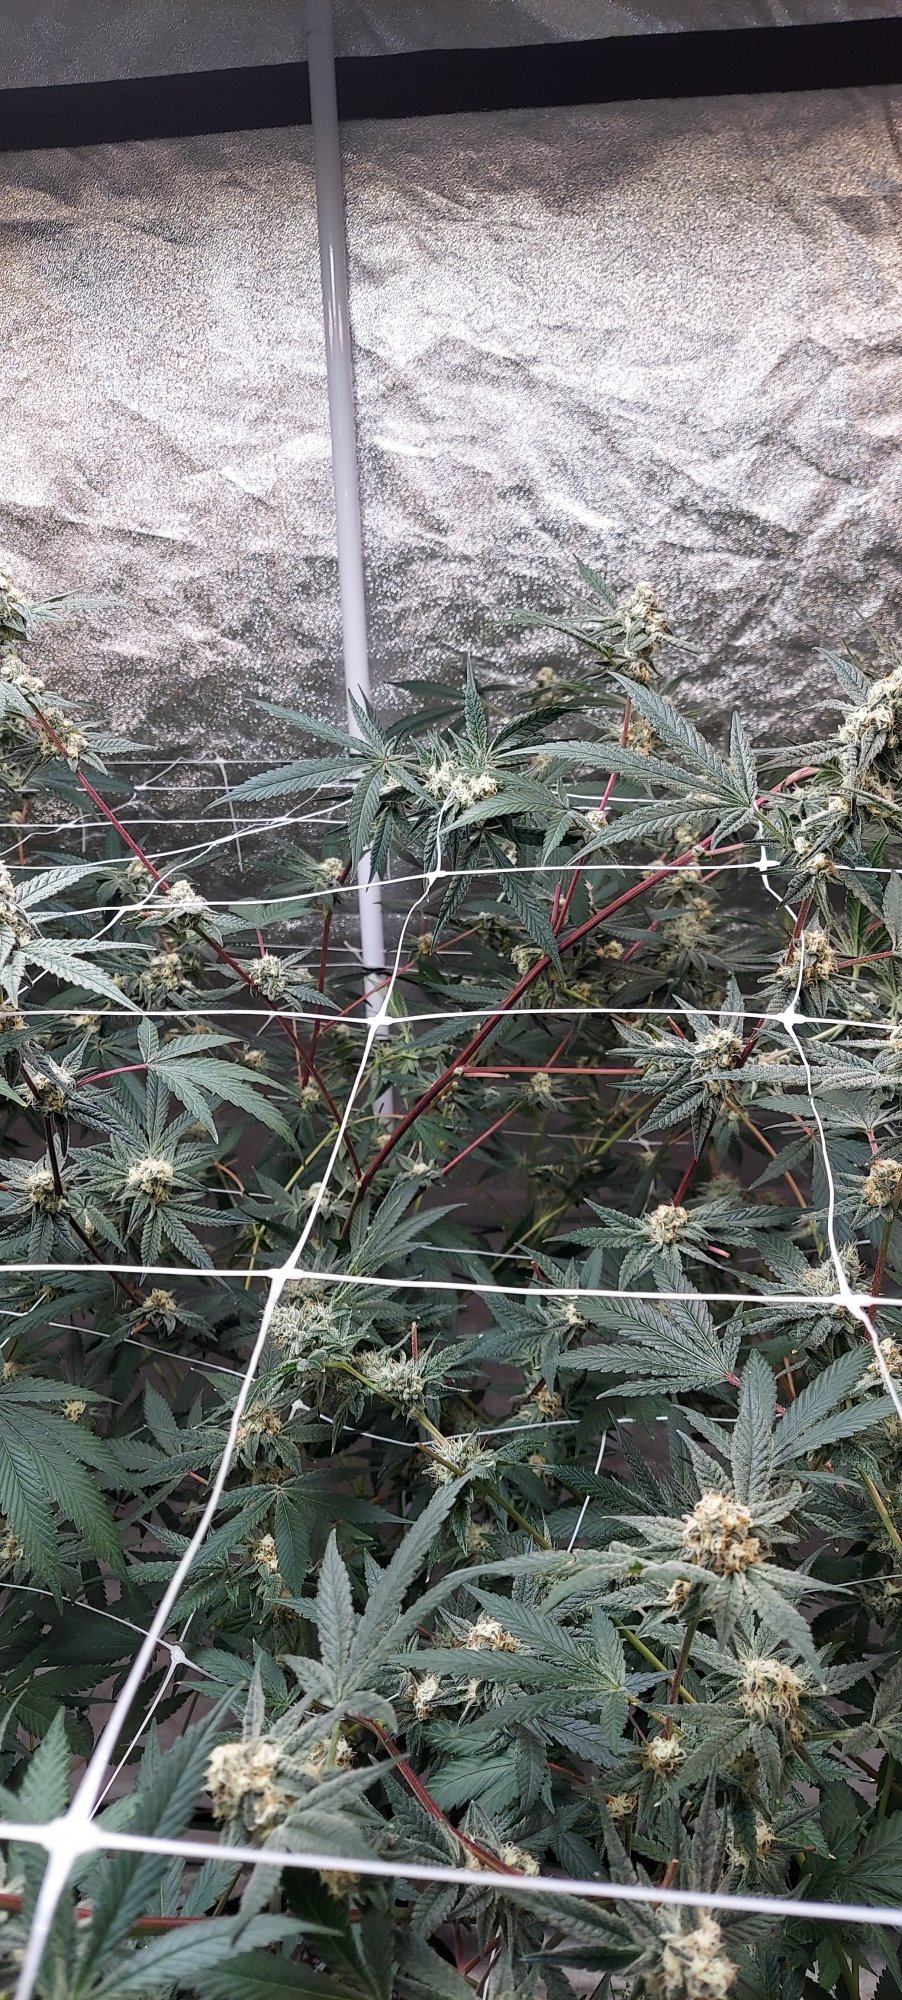 Is this a magnesium deficiency